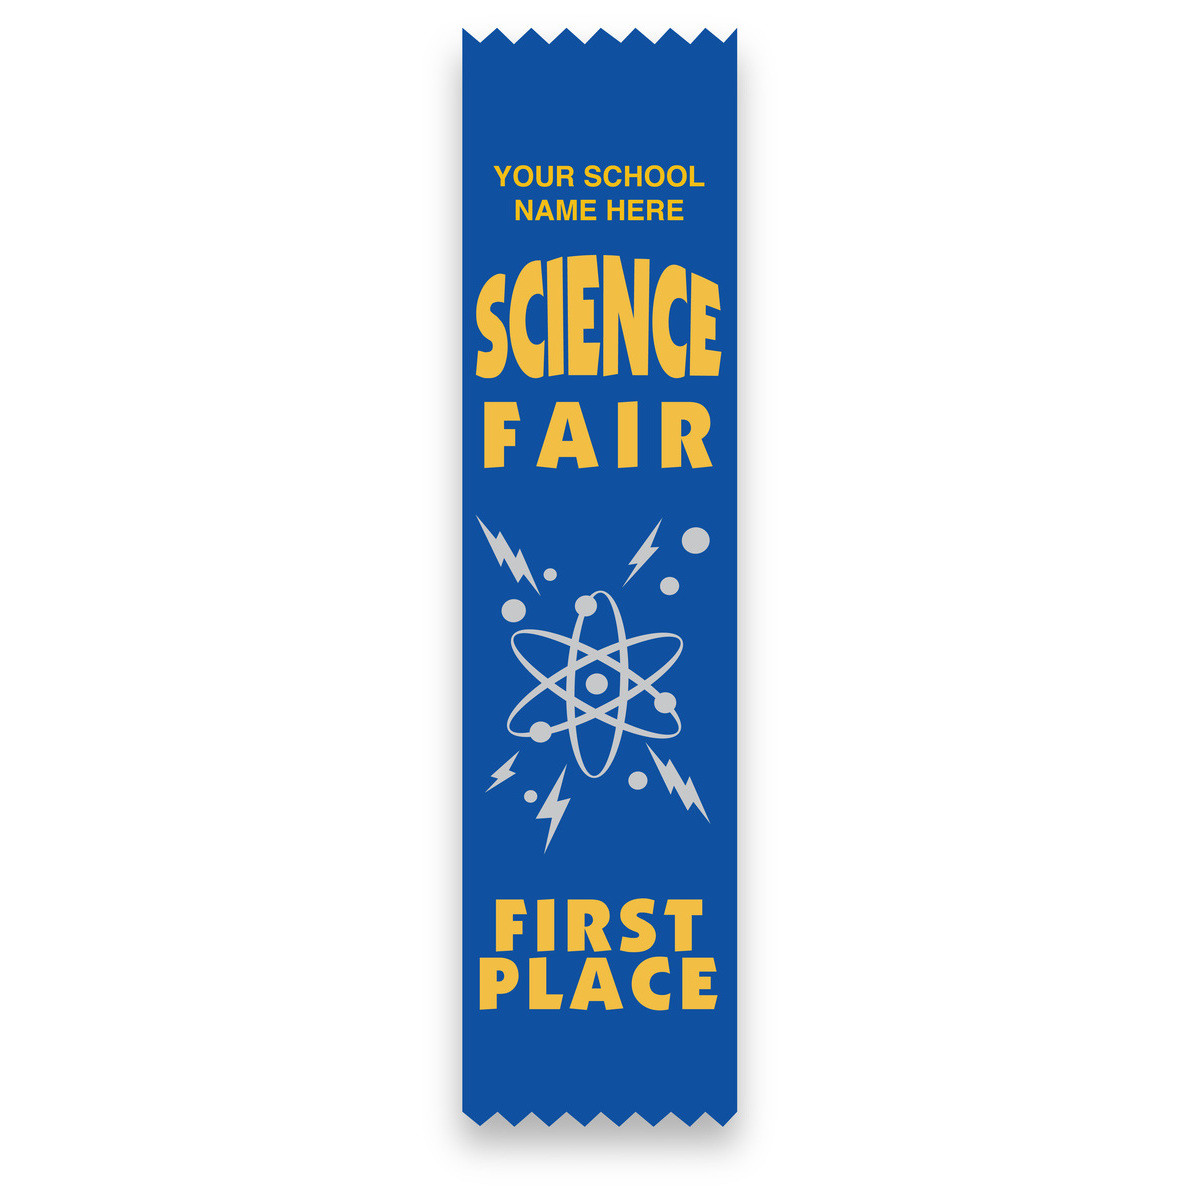 Imprinted Flat Ribbon - Science Fair 1st Place